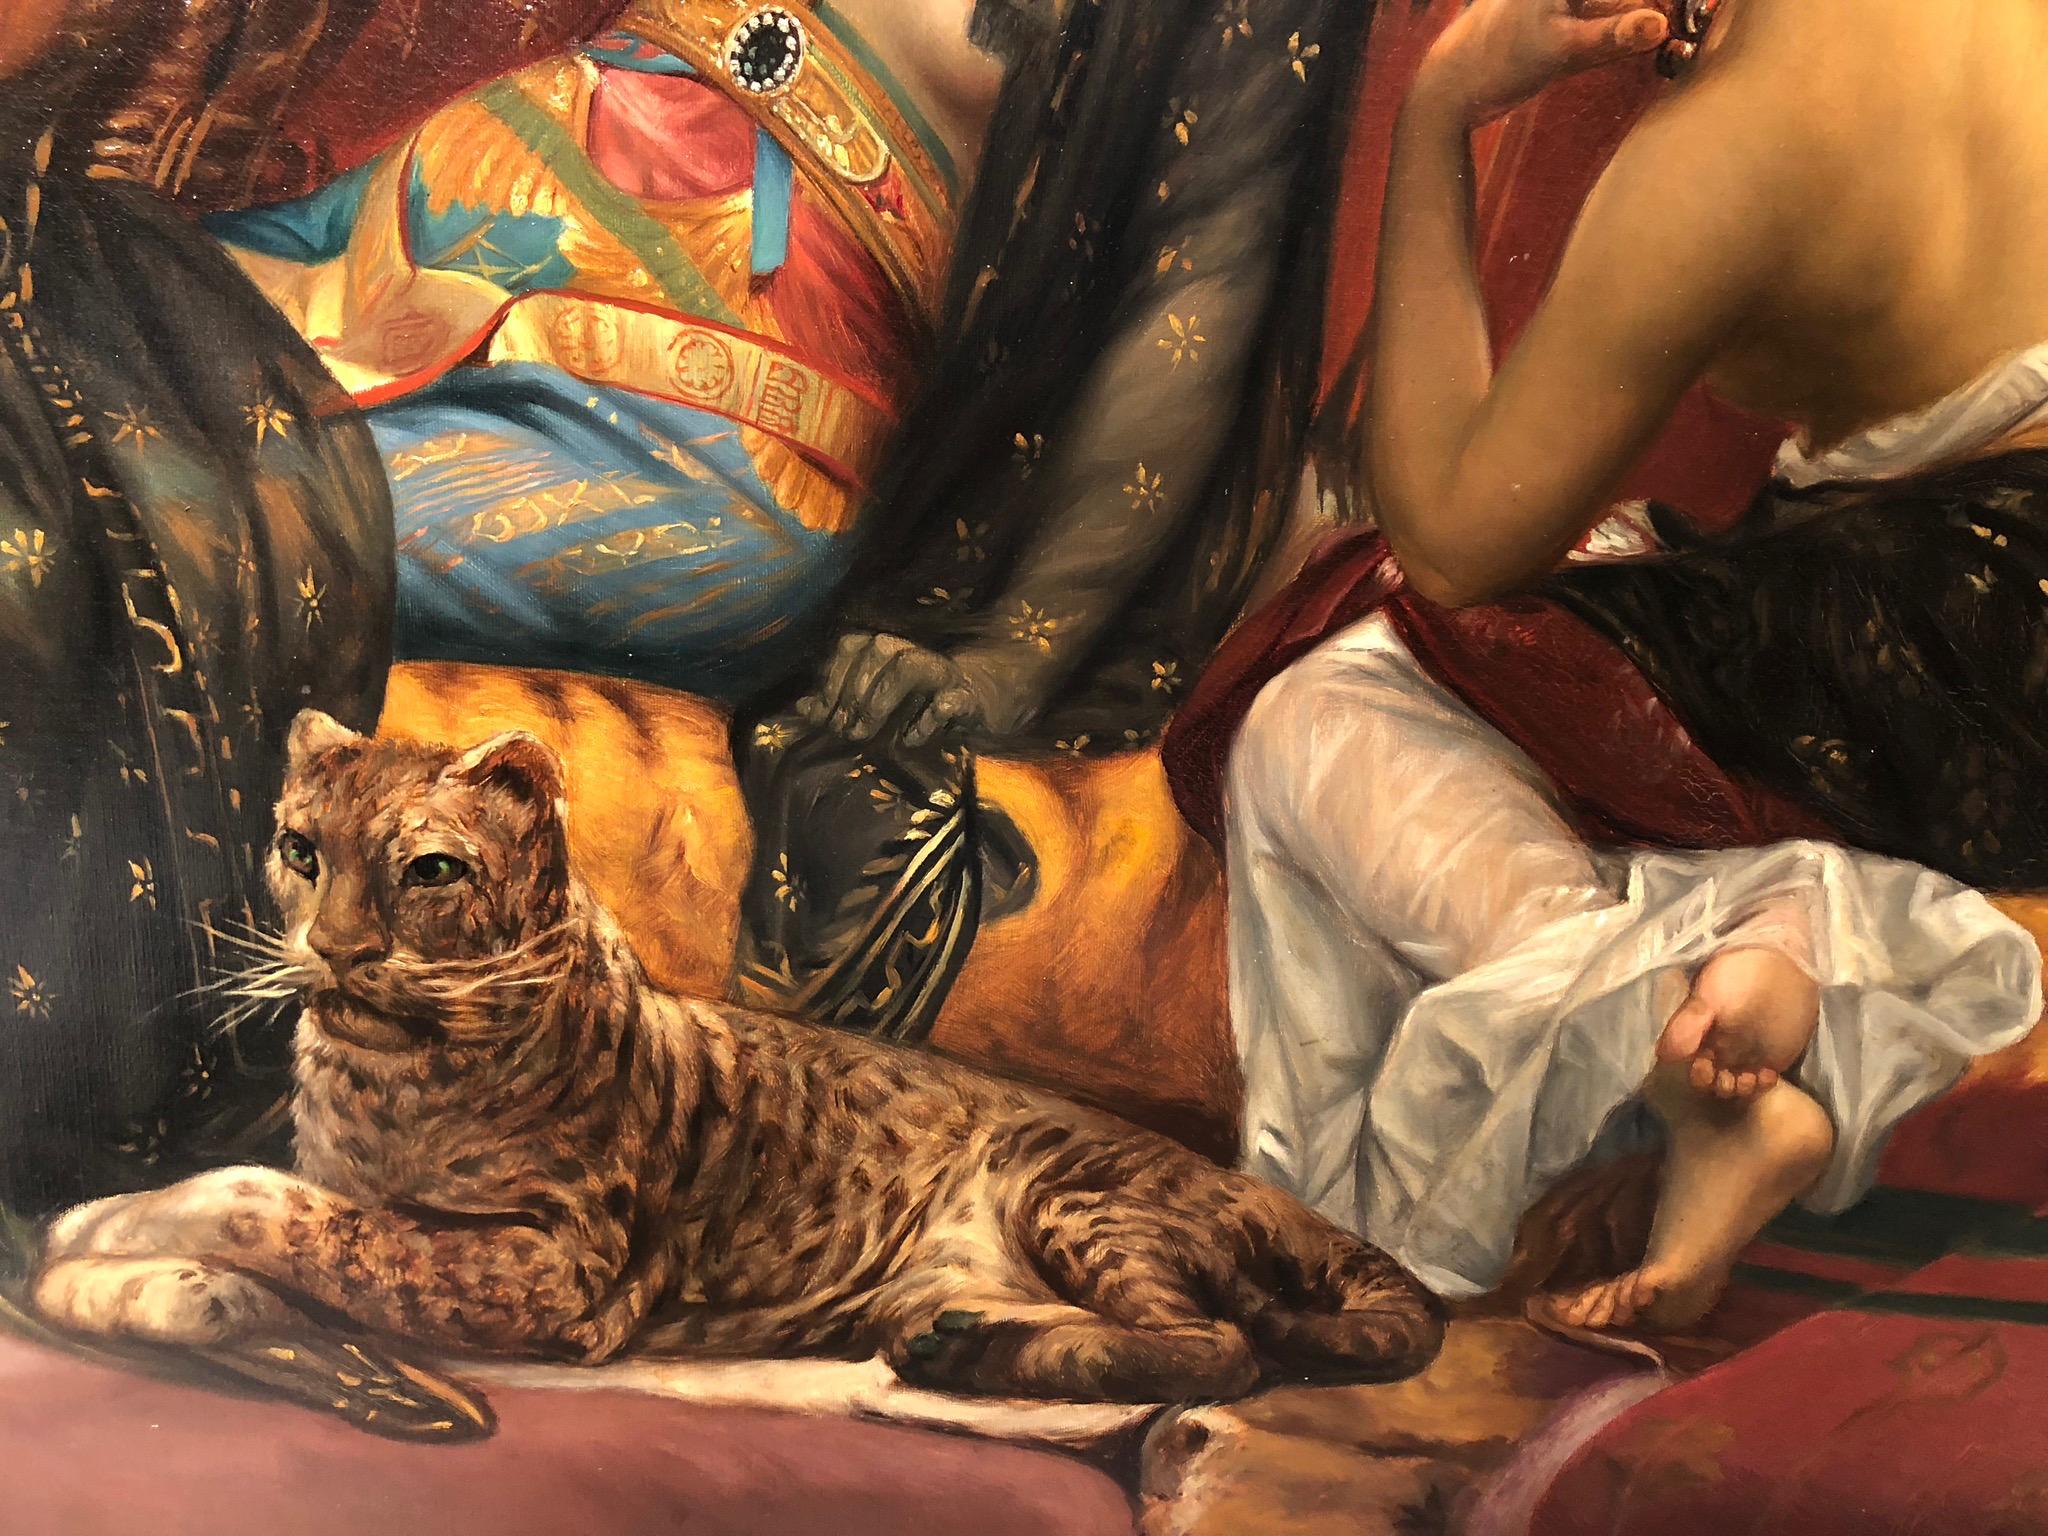 Cleopatra Testing Poison on Condemned Prisoners - Black Figurative Painting by Alexandre Cabanel